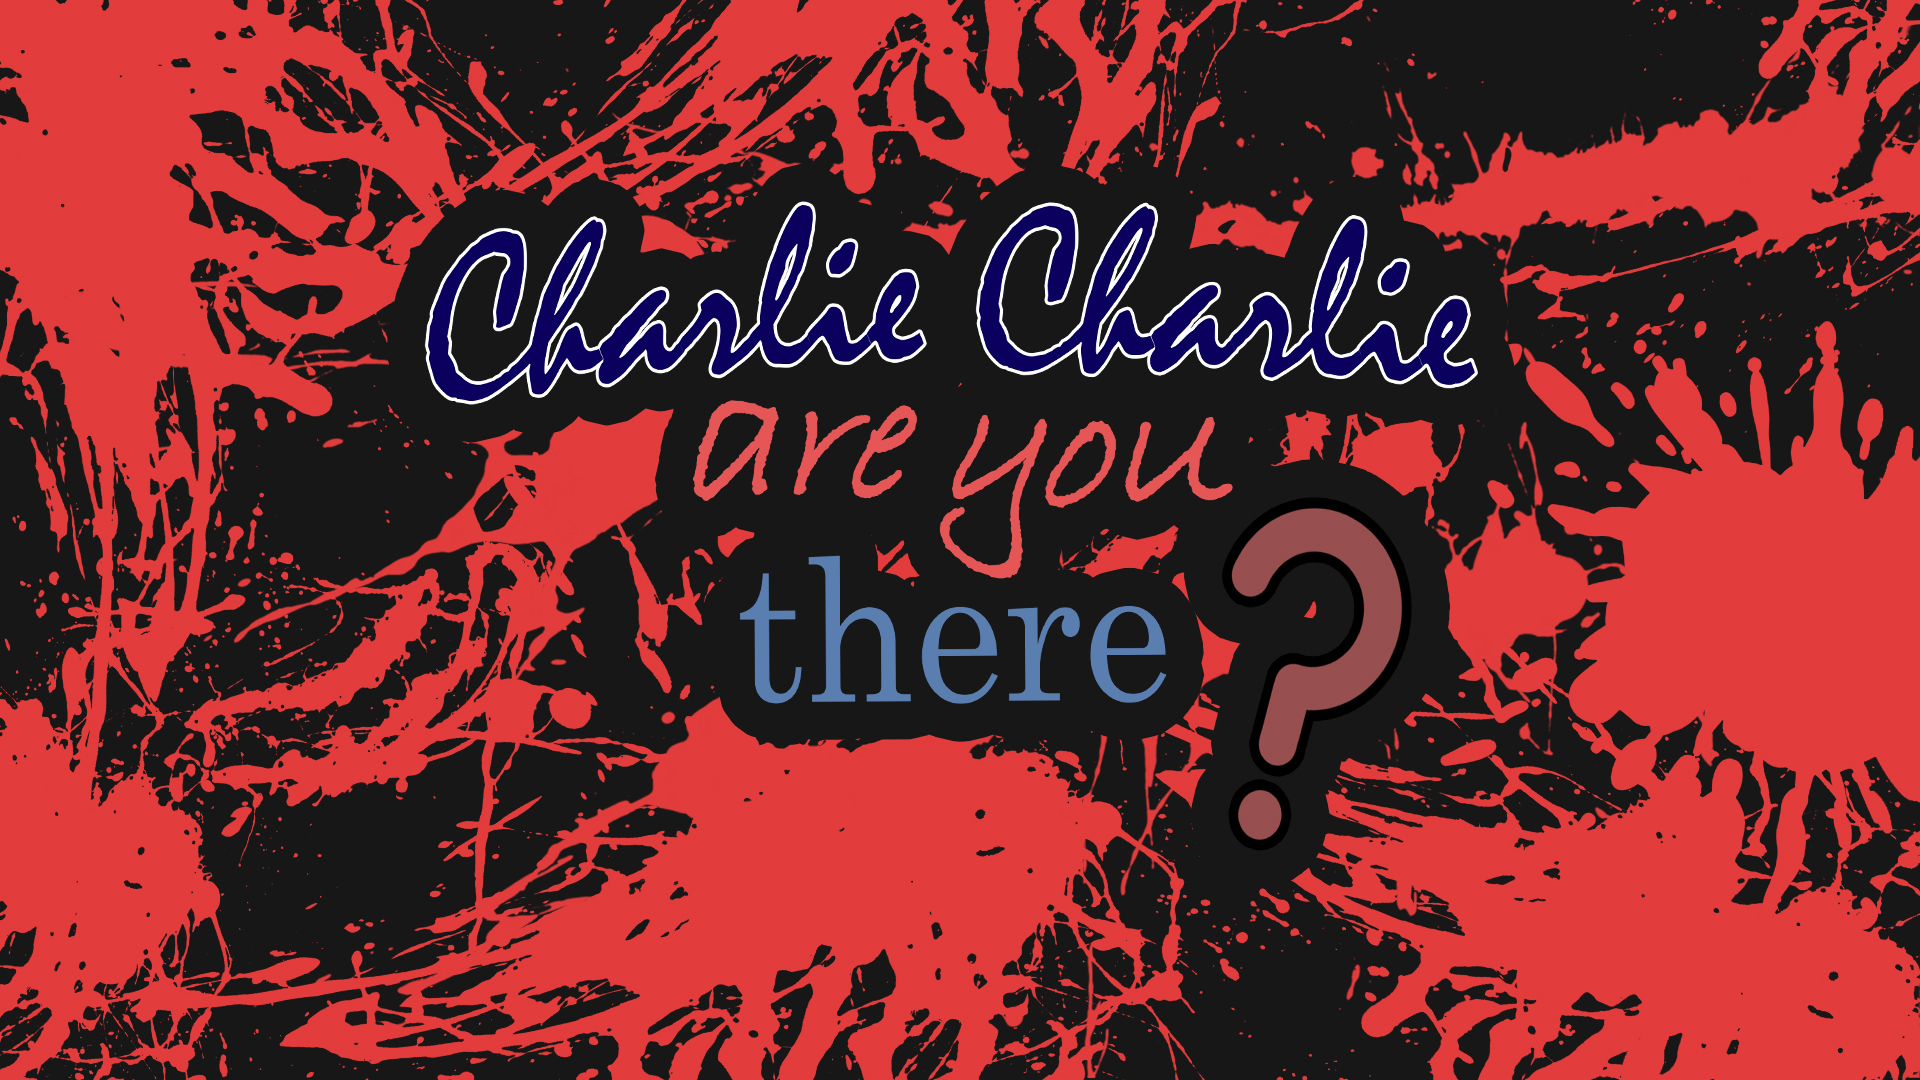 Charlie Charlie are you there?